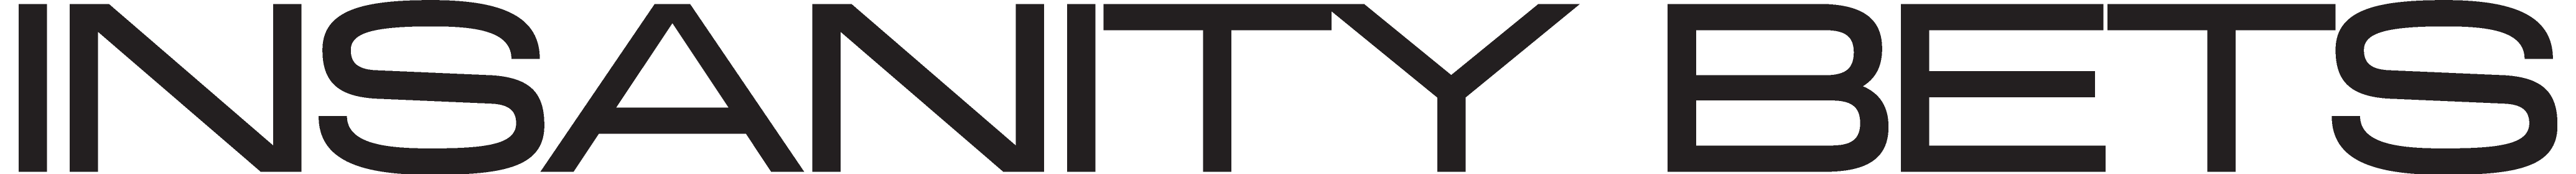 InsanityBets Logo.png